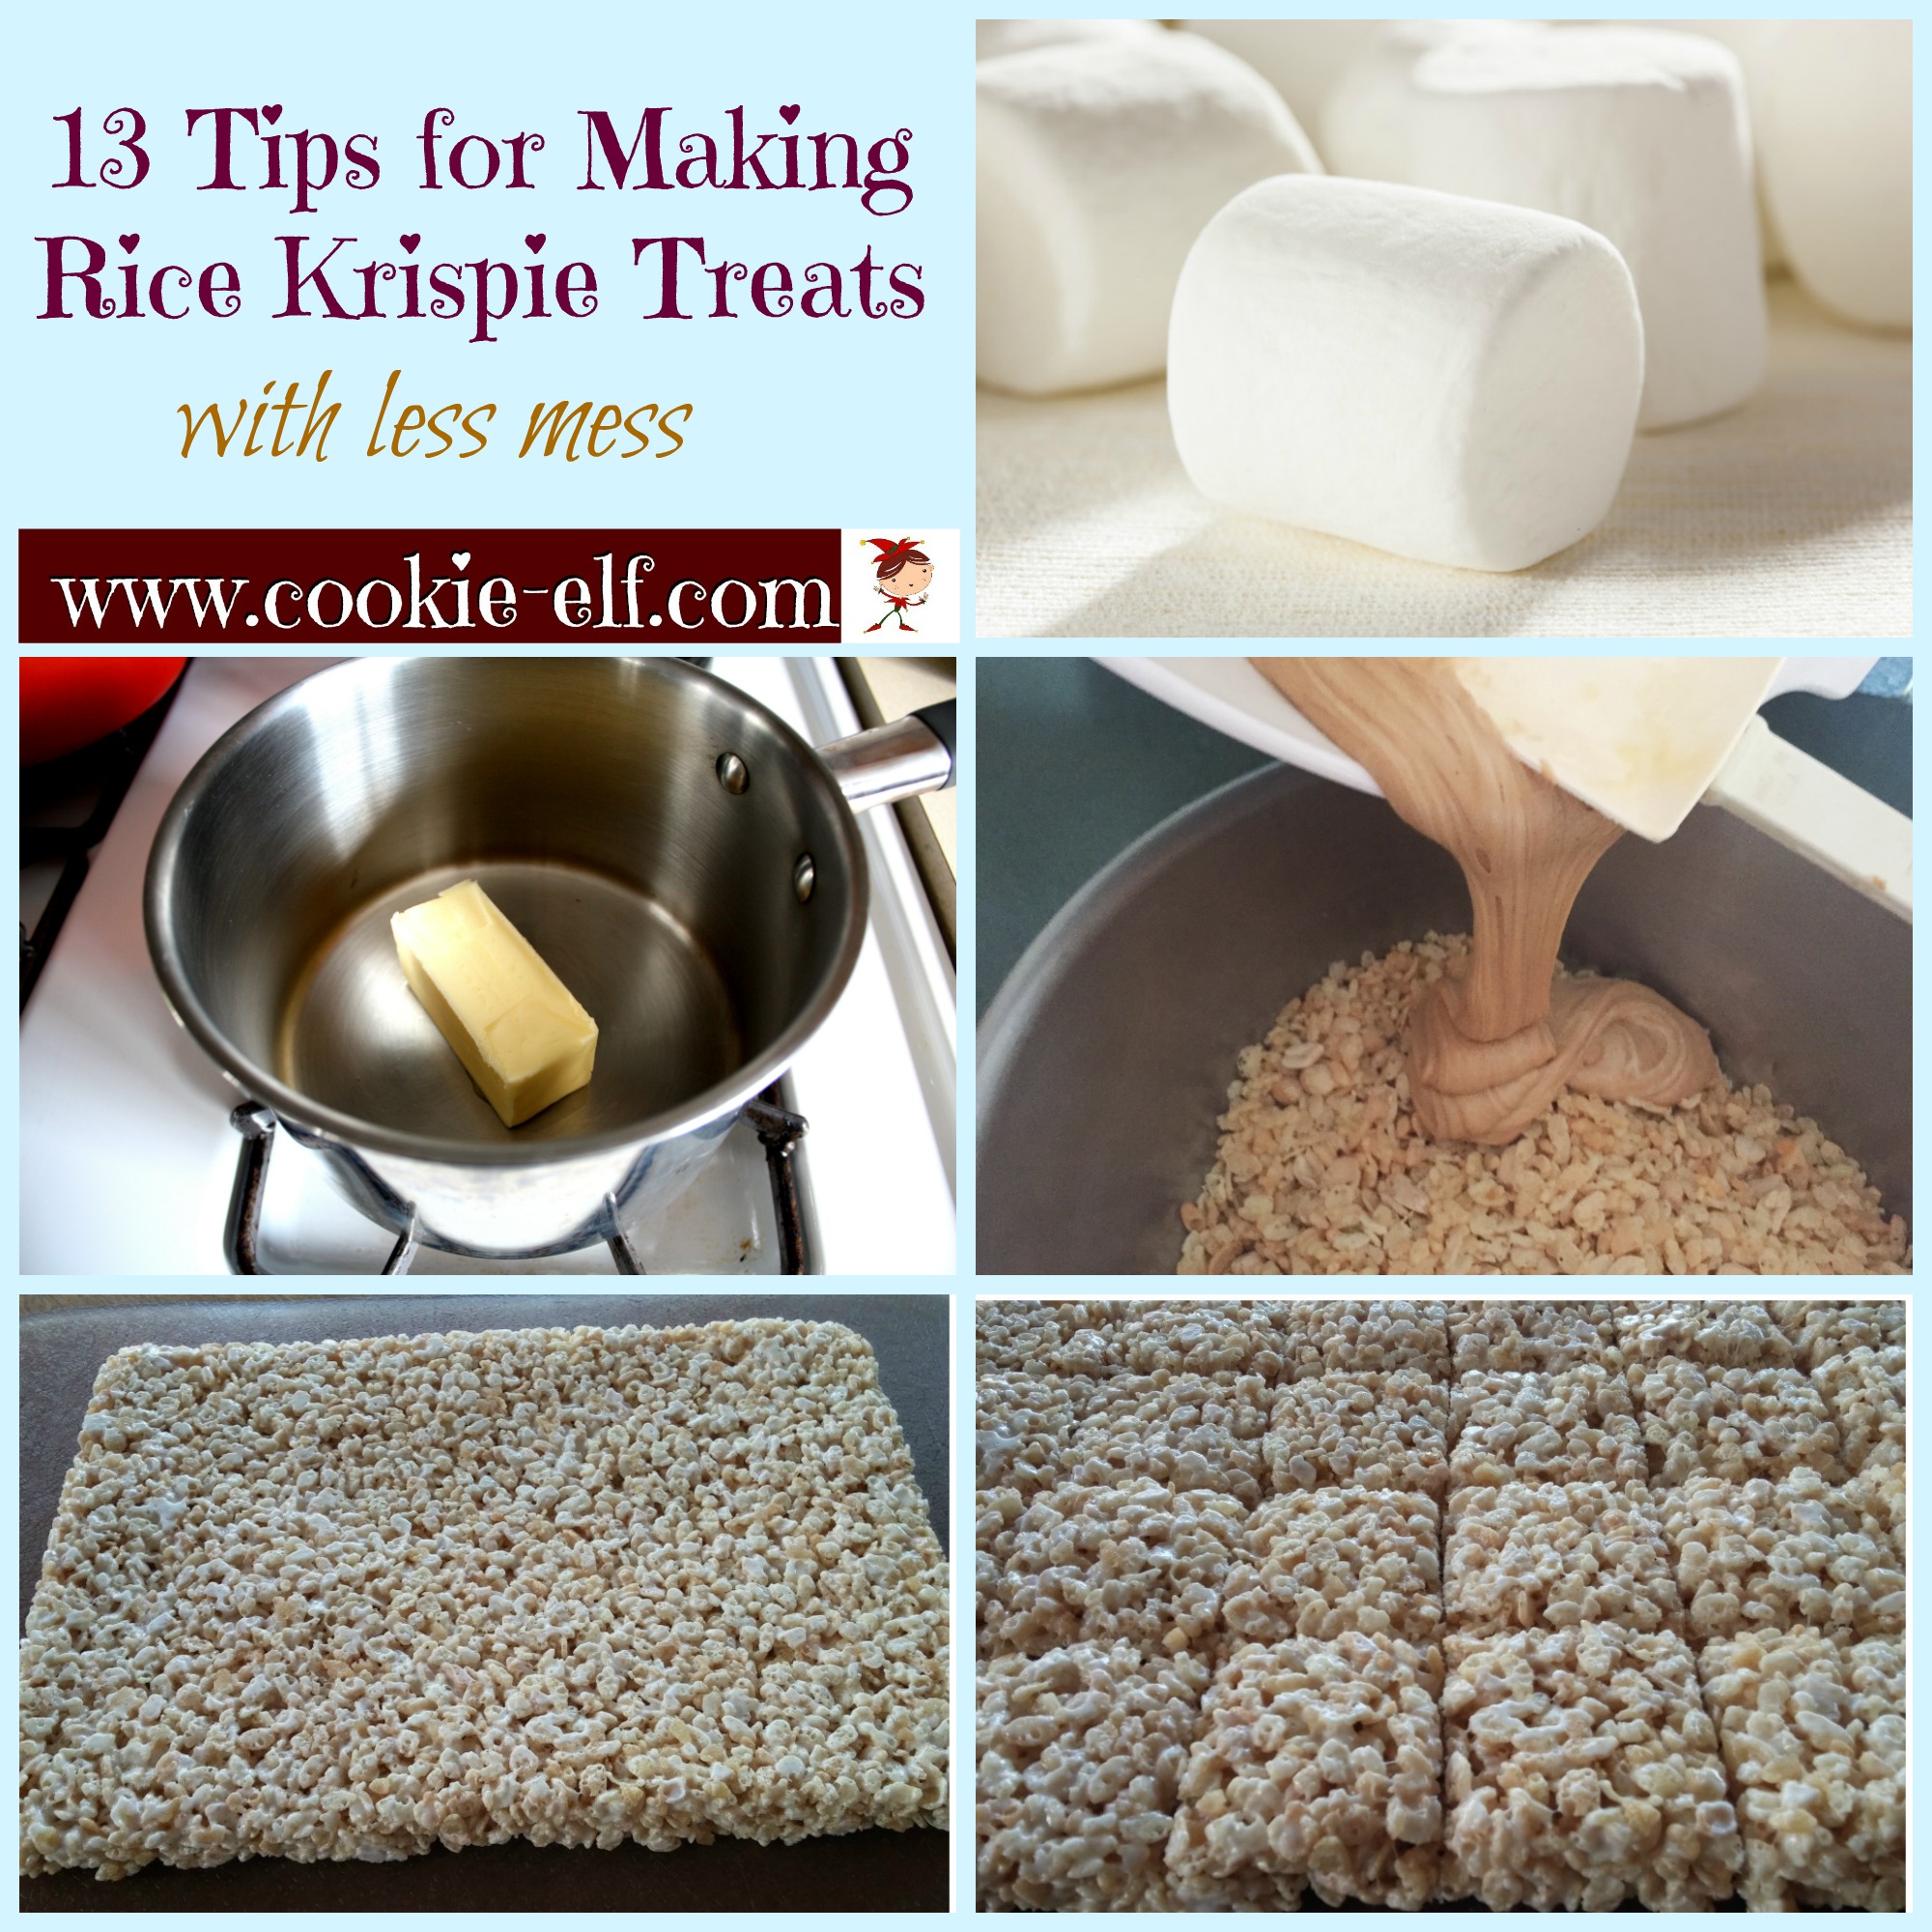 13 baking tips for making Rice Krispie Treats from The Cookie Elf